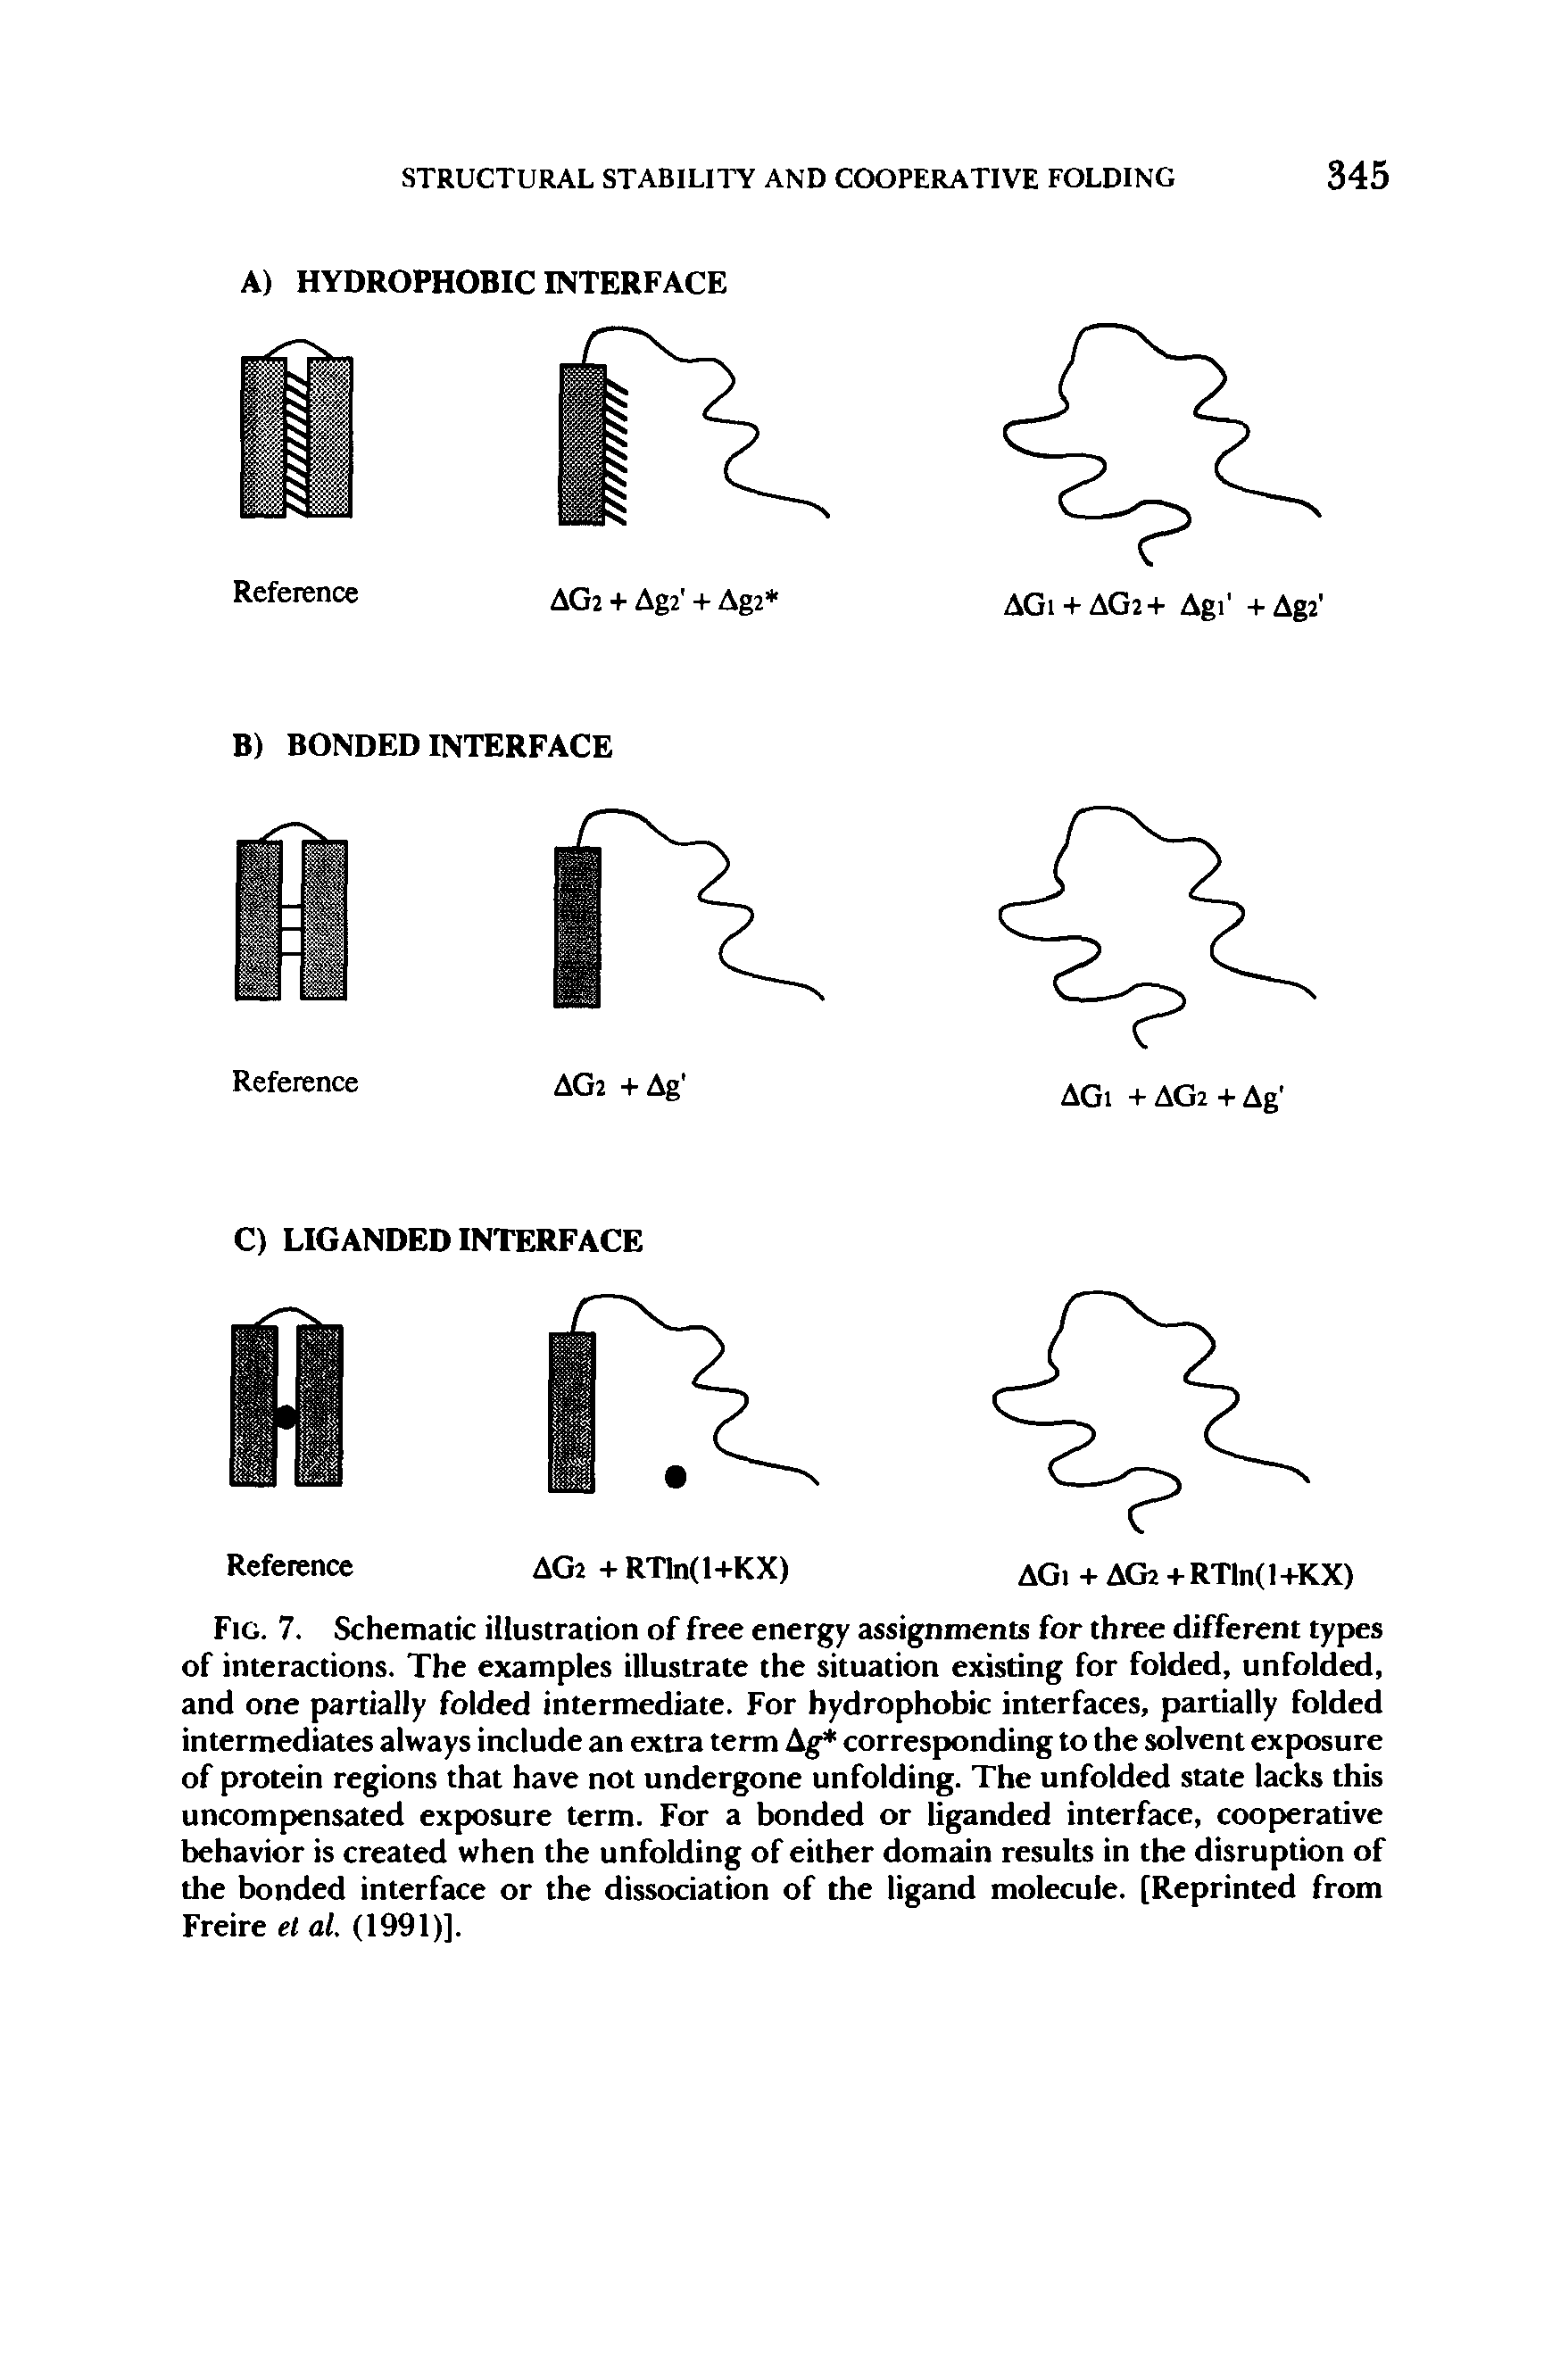 Fig. 7. Schematic illustration of free energy assignments for three different types of interactions. The examples illustrate the situation existing for folded, unfolded, and one partially folded intermediate. For hydrophobic interfaces, partially folded intermediates always include an extra term Ag corresponding to the solvent exposure of protein regions that have not undergone unfolding. The unfolded state lacks this uncompensated exposure term. For a bonded or liganded interface, cooperative behavior is created when the unfolding of either domain results in the disruption of the bonded interface or the dissociation of the ligand molecule. [Reprinted from Freire el al. (1991)].